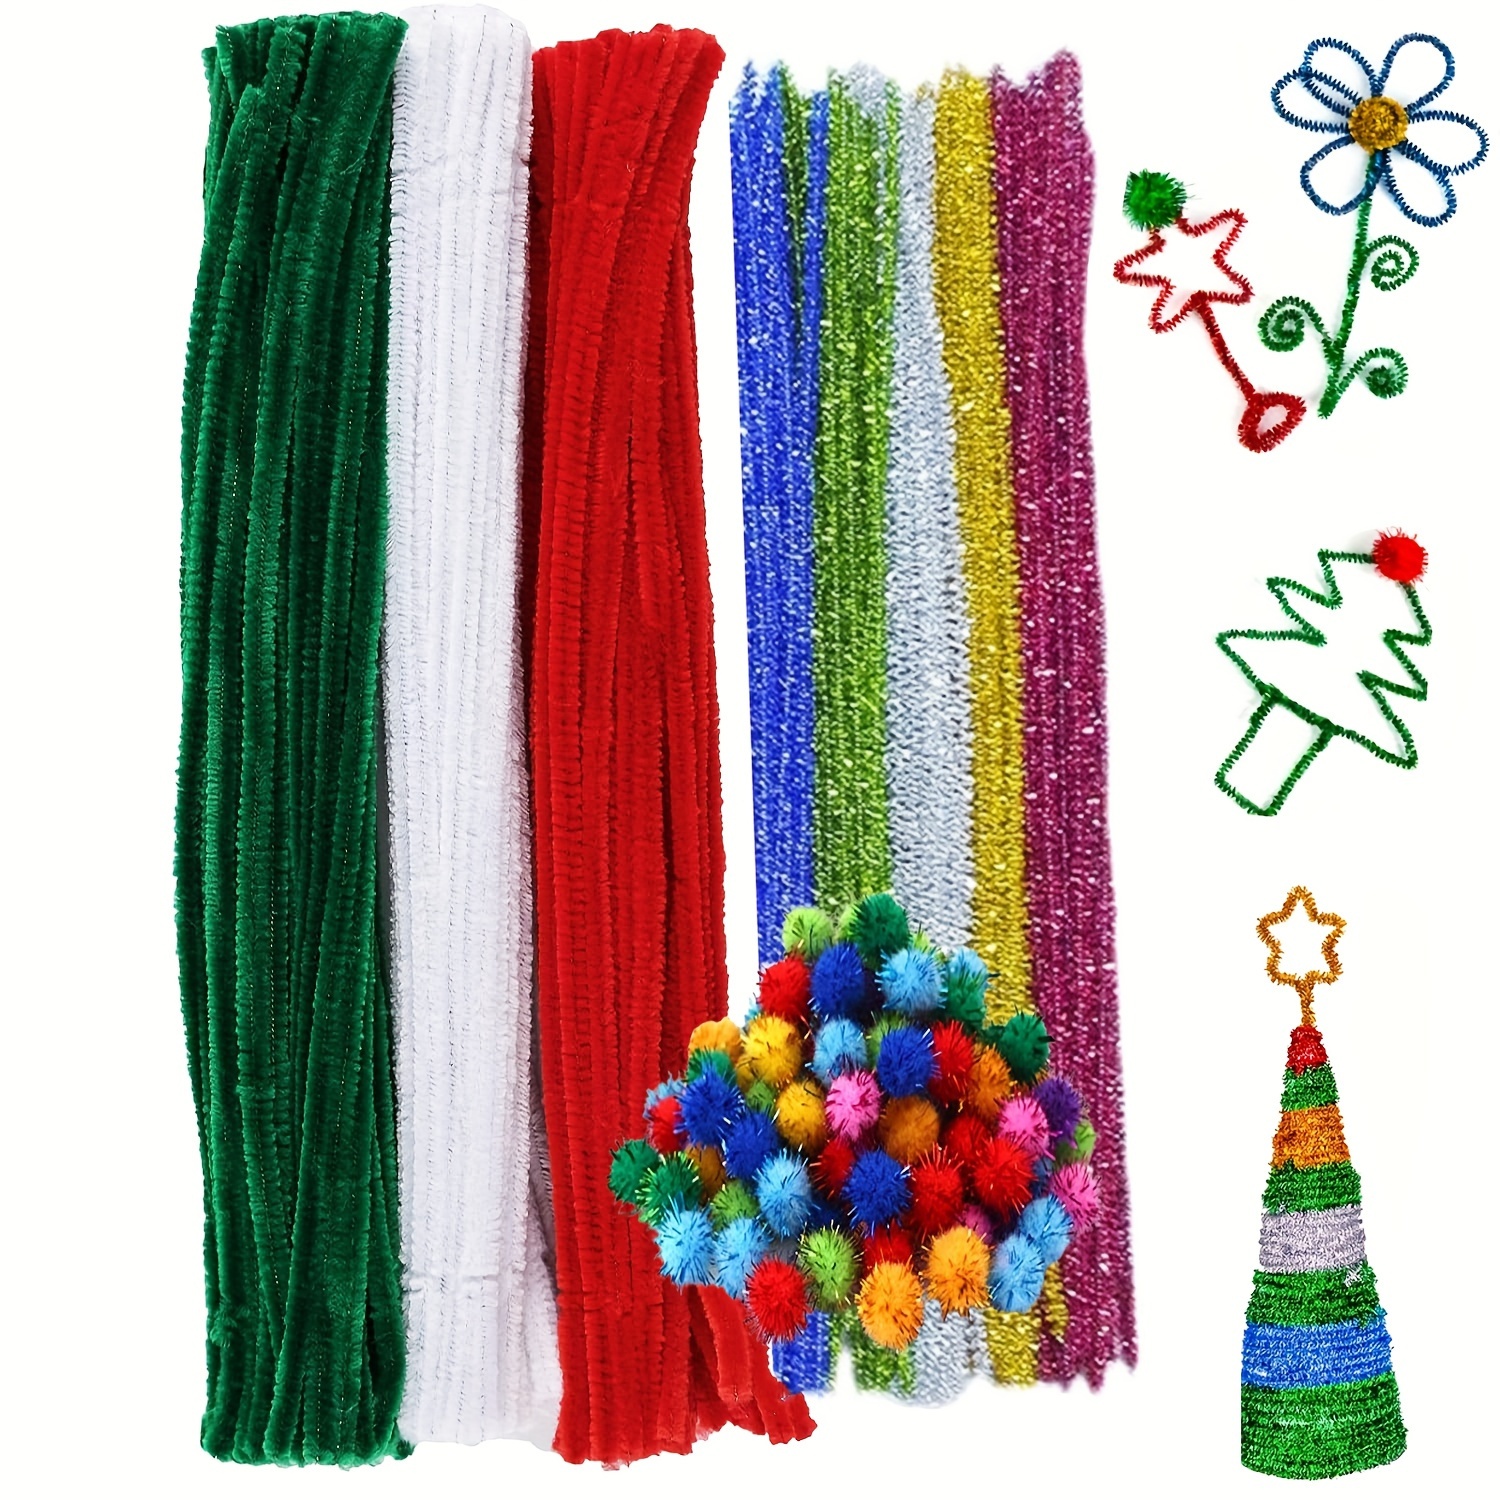  EXCEART 200pcs 1 Pack Christmas Party Favors Pompoms for Crafts  Pom Pom Garland Pet Cat Toy Pom Pom Christmas Pipe Cleaners Glitter  Chenille Stems Pom Pom Material Fluffy Christmas Tree 